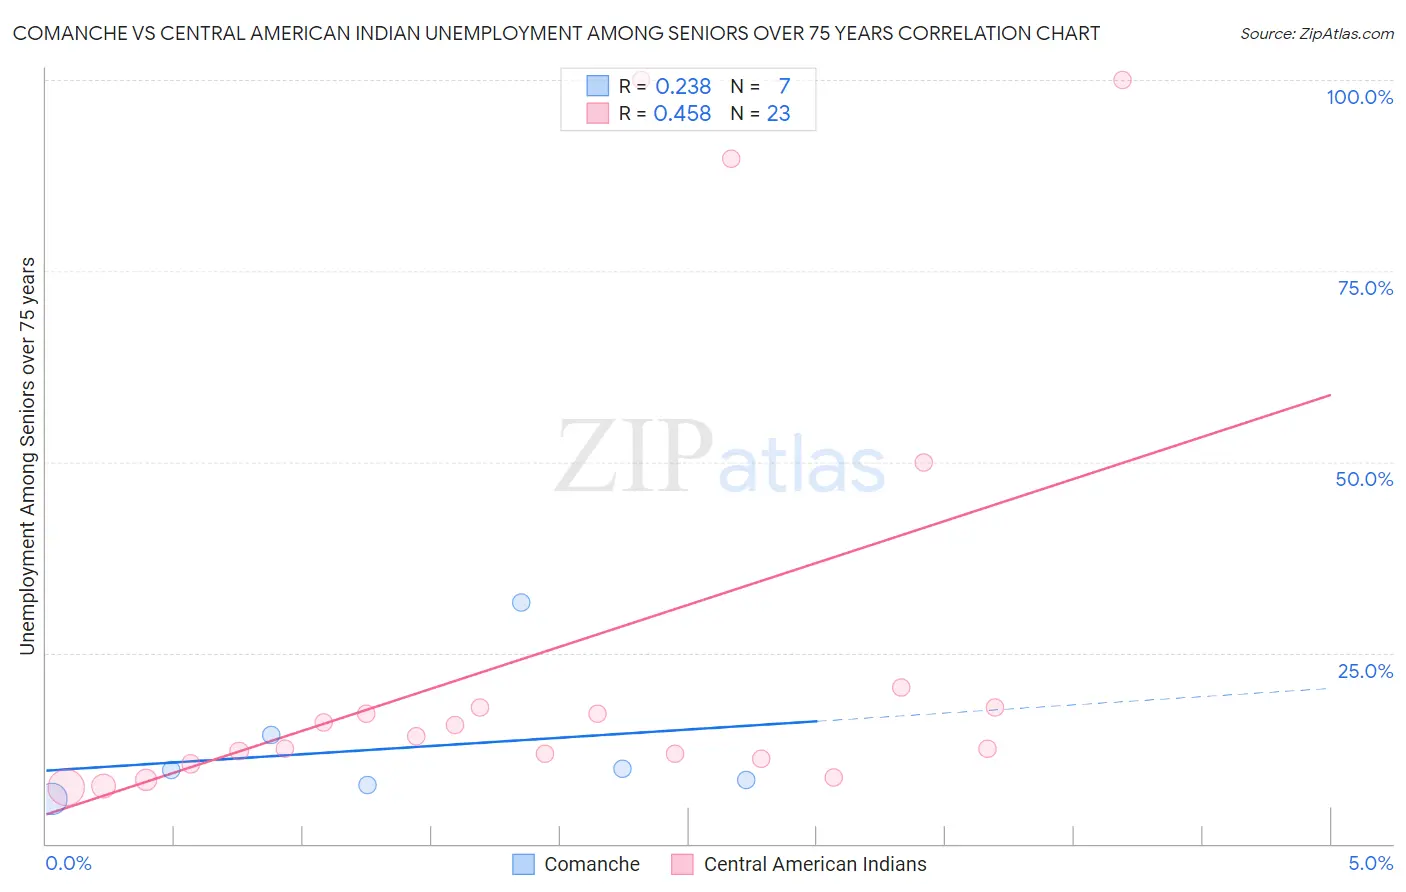 Comanche vs Central American Indian Unemployment Among Seniors over 75 years